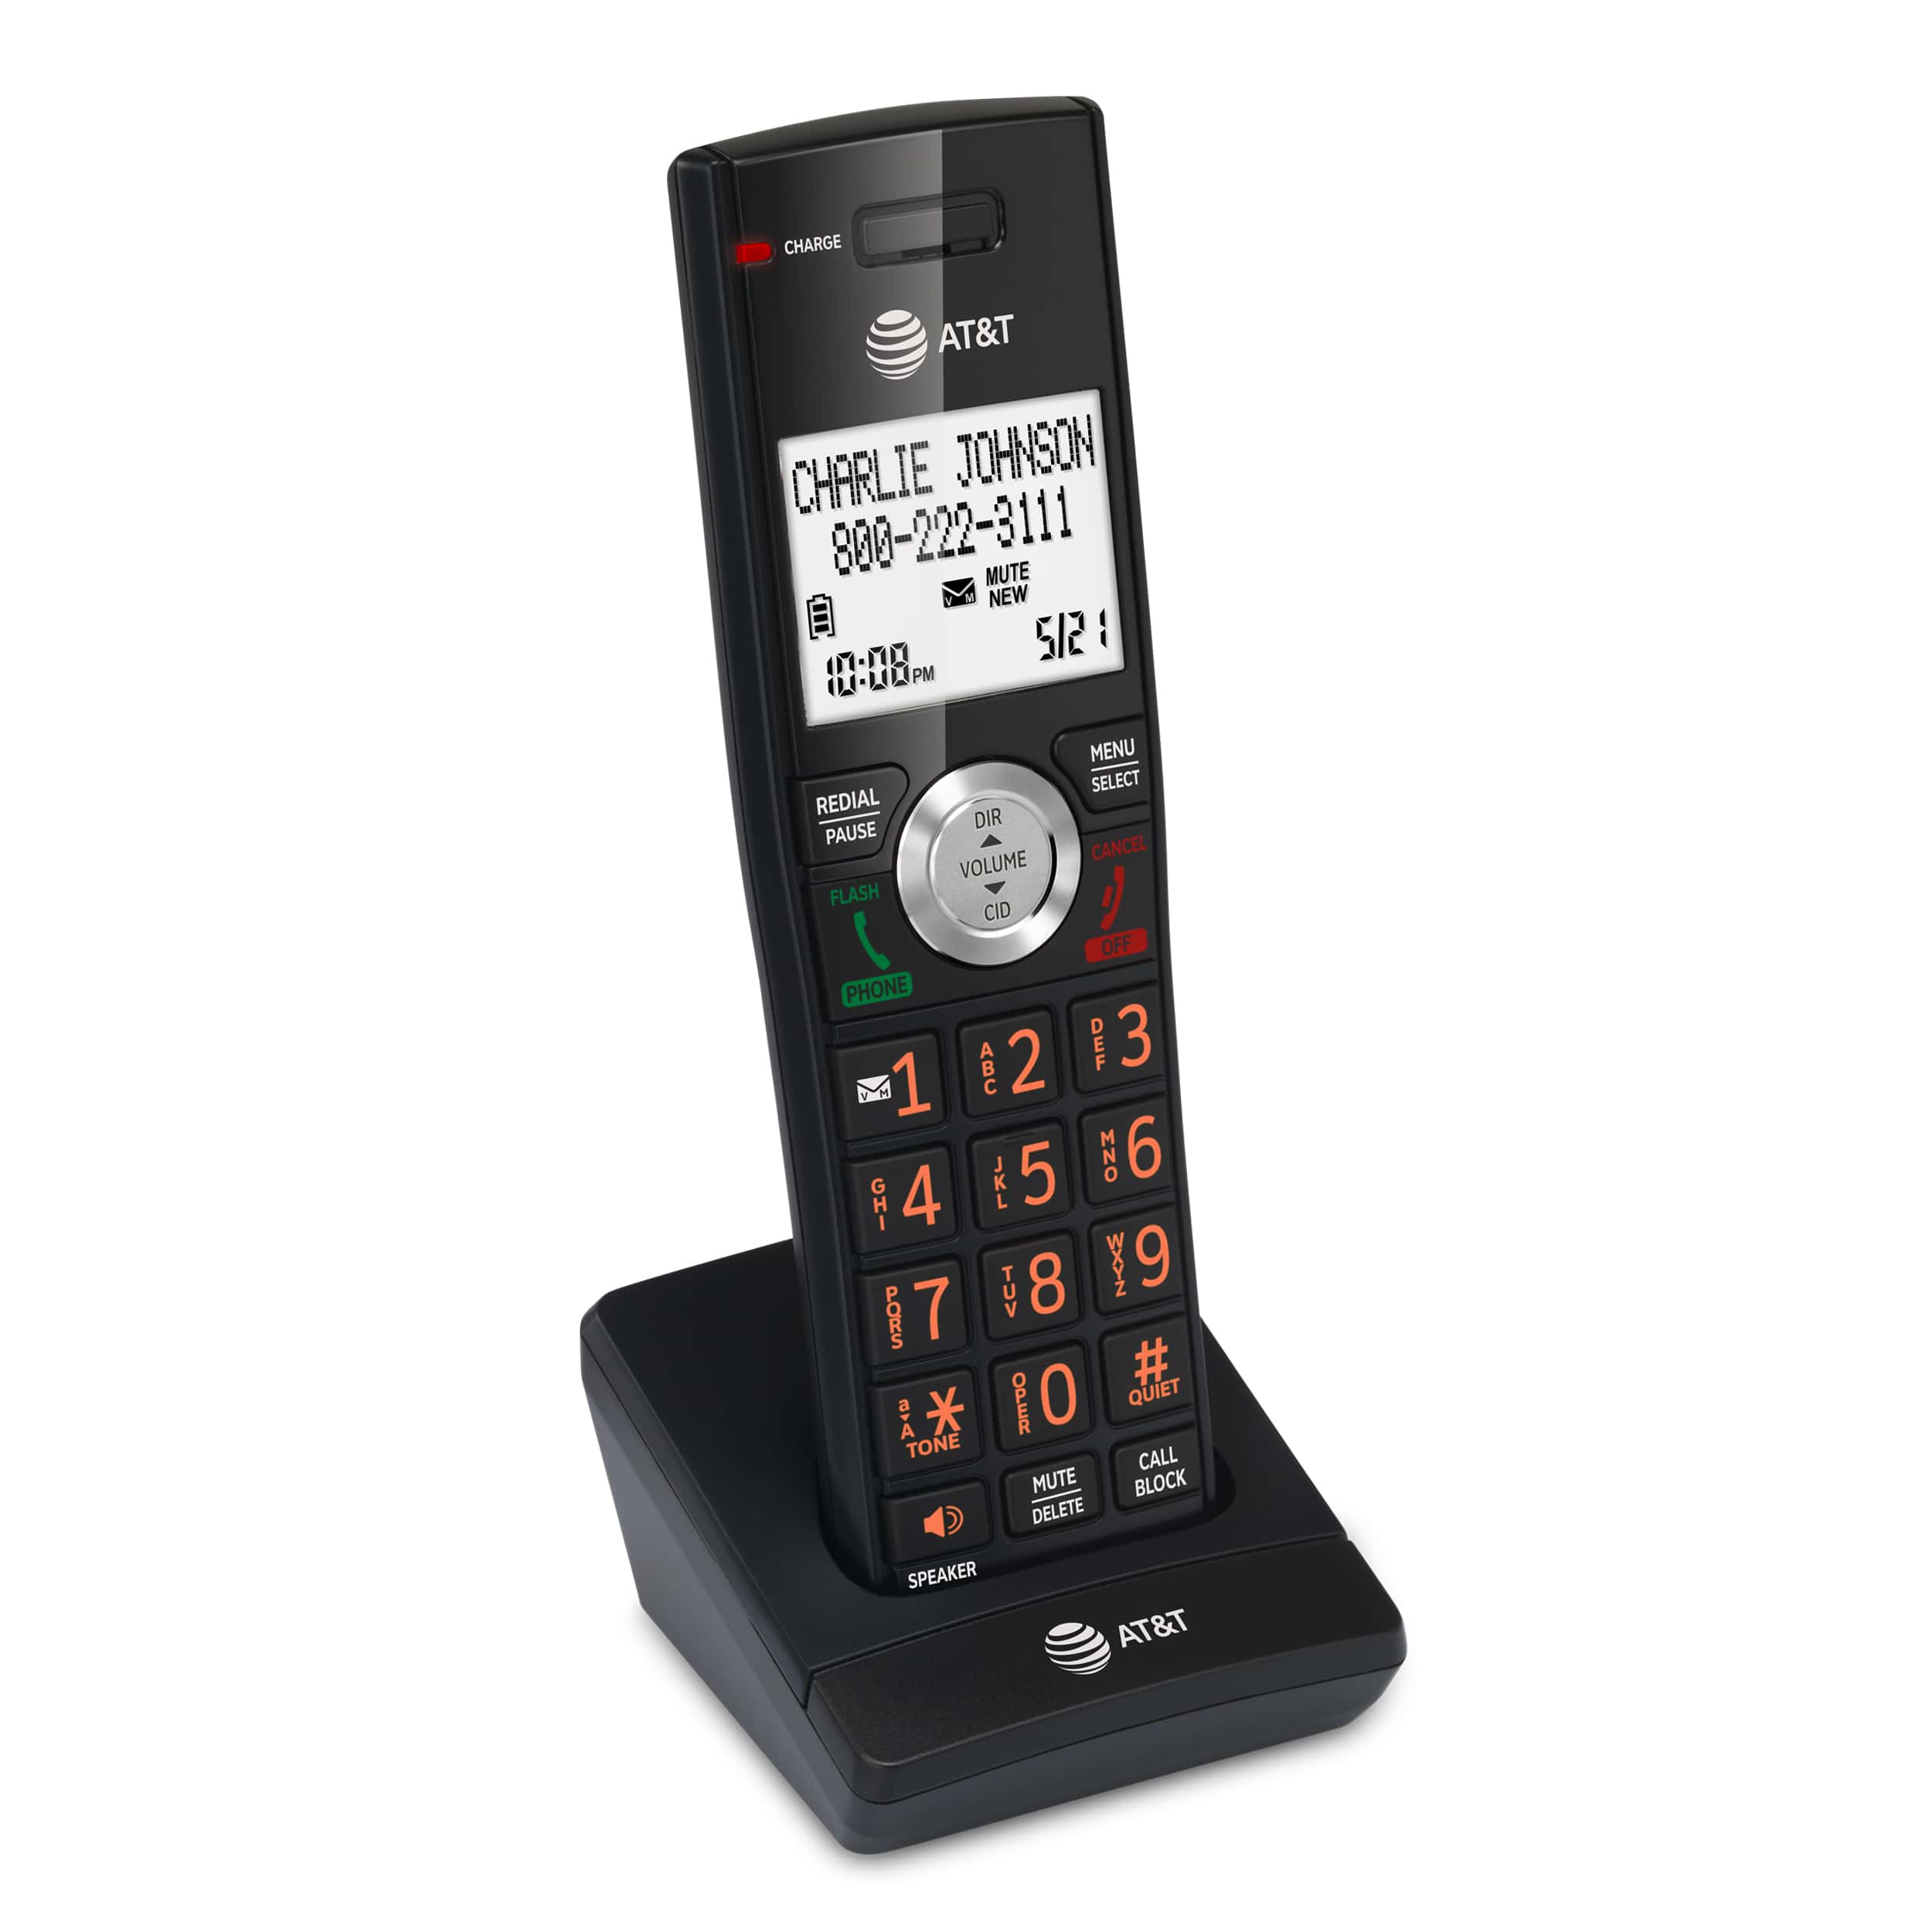 Cordless Accessory Handset for AT&T CL82207, CL82267, CL82307, CL82367, CL82407, CL83207, CL83407, CL84107, CL84207 and CL84327 - view 3